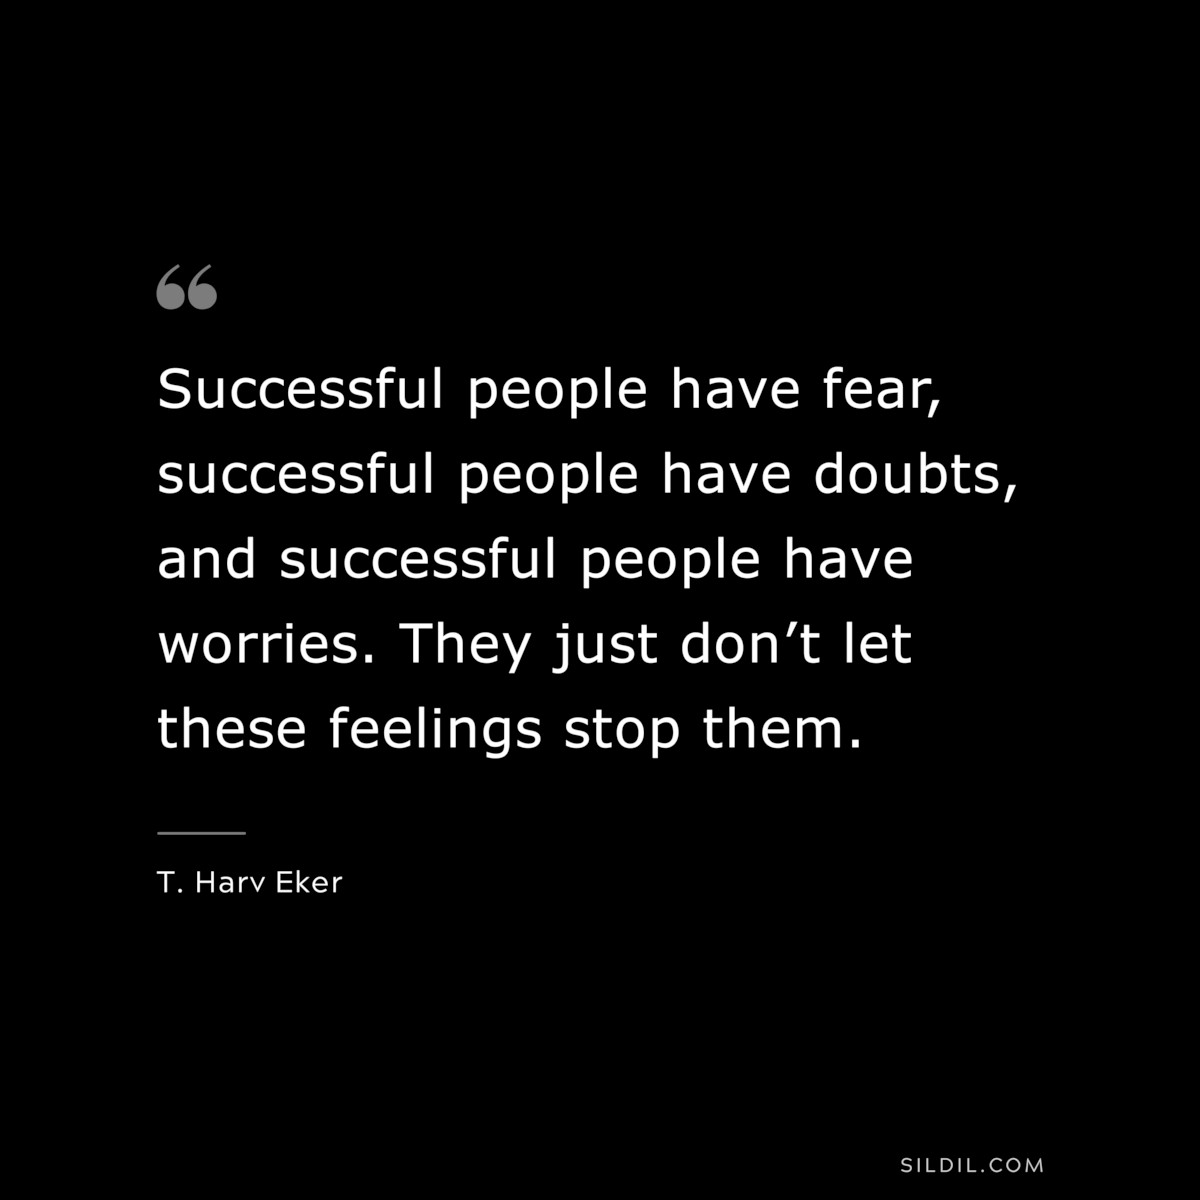 Successful people have fear, successful people have doubts, and successful people have worries. They just don’t let these feelings stop them. ― T. Harv Eker